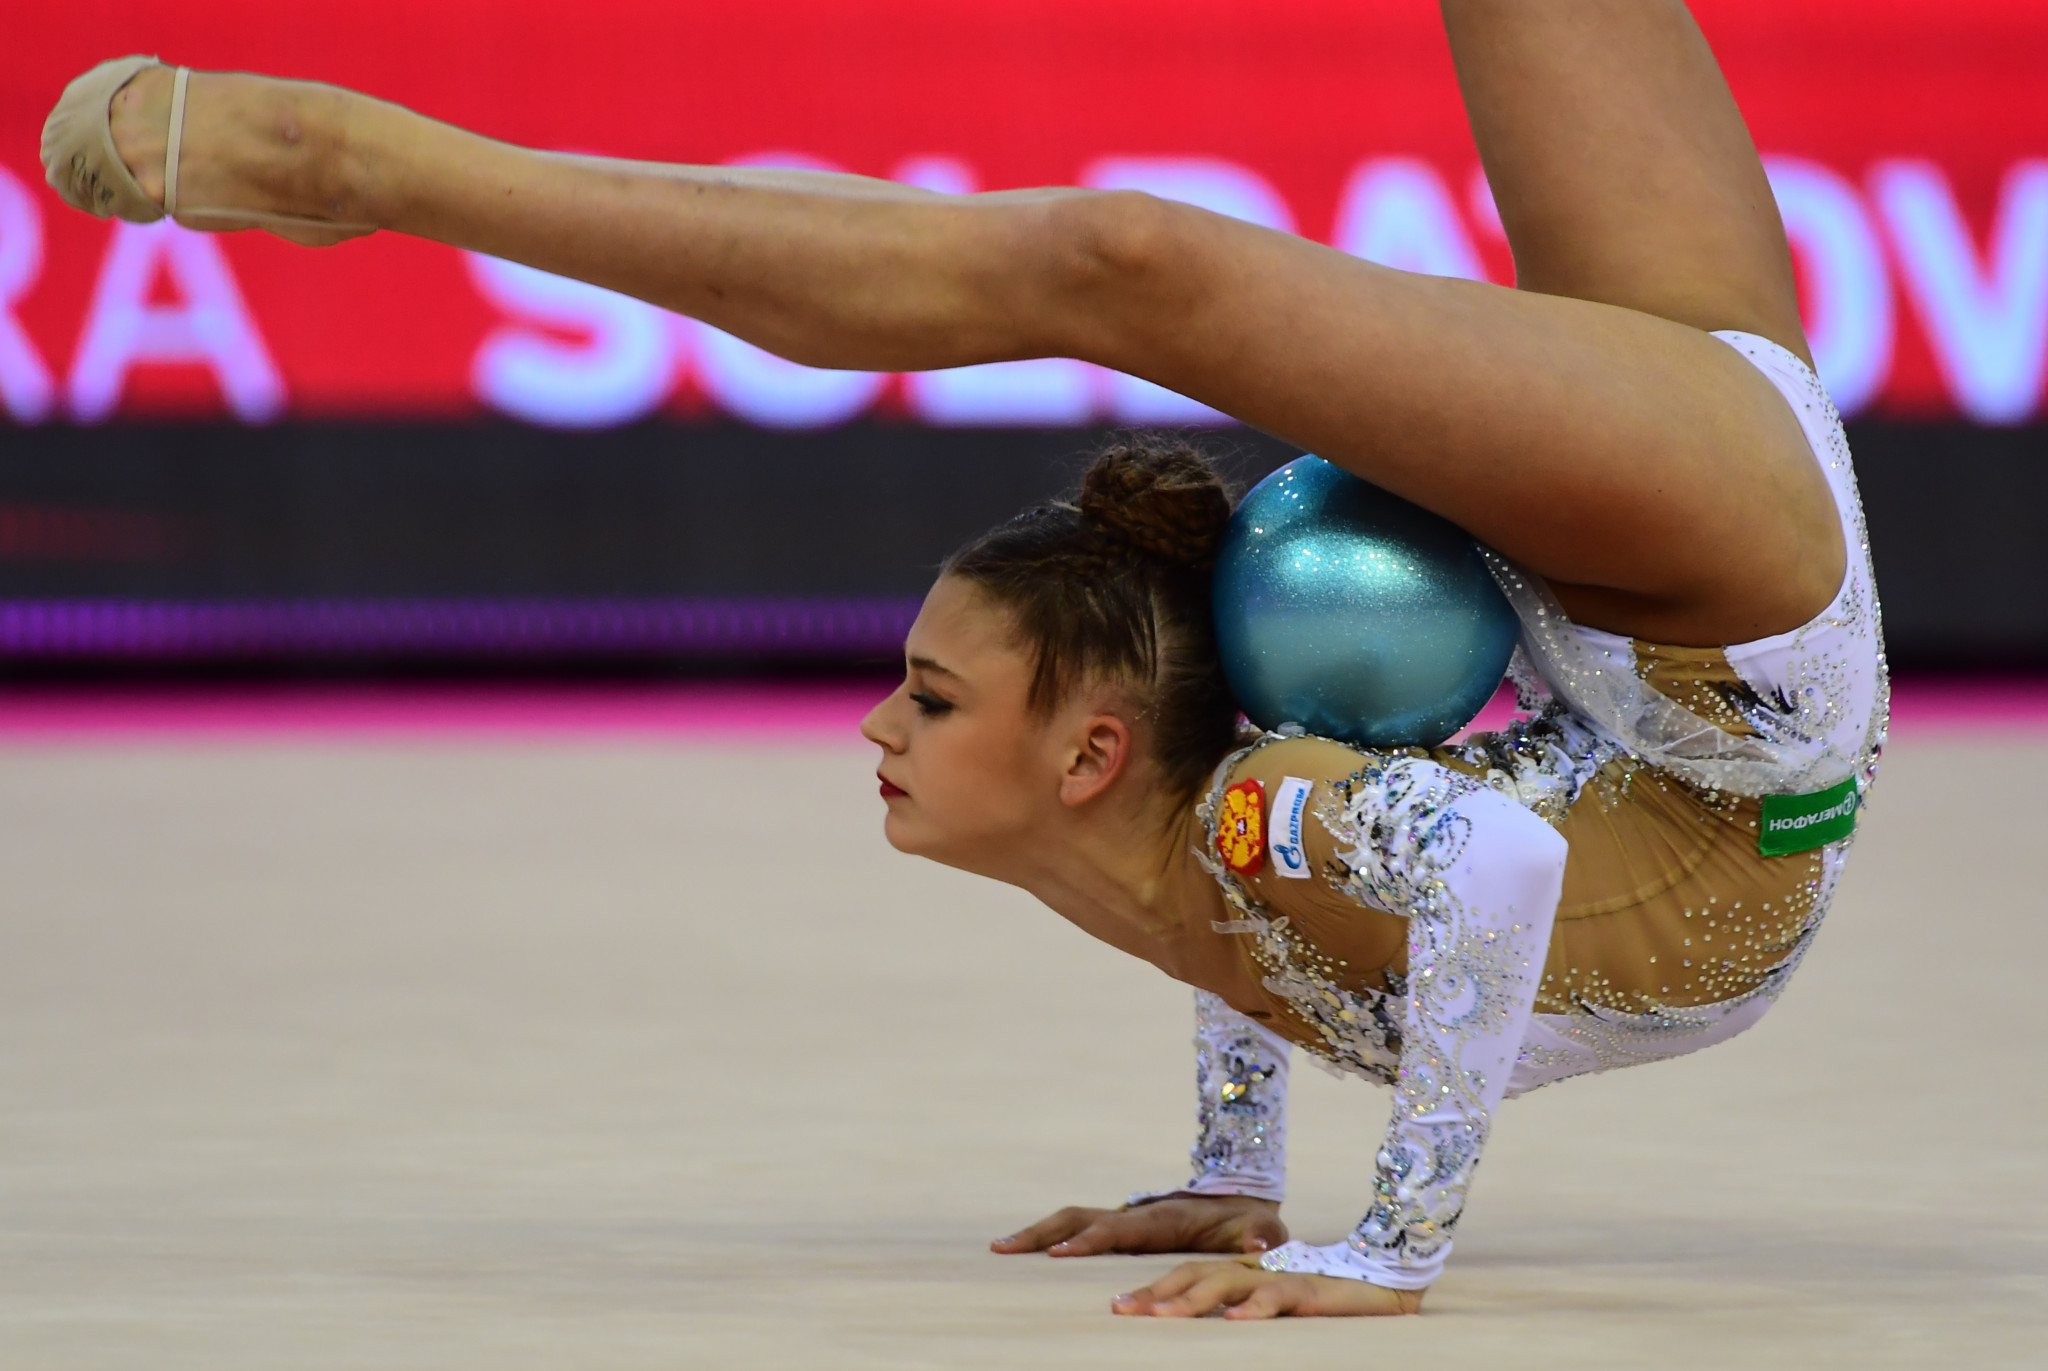 Aleksandra Soldatova of Russia, who swept the gold medals in the all-around, hoop and ball competitions, has not entered the competition in Tashkent ©Getty Images